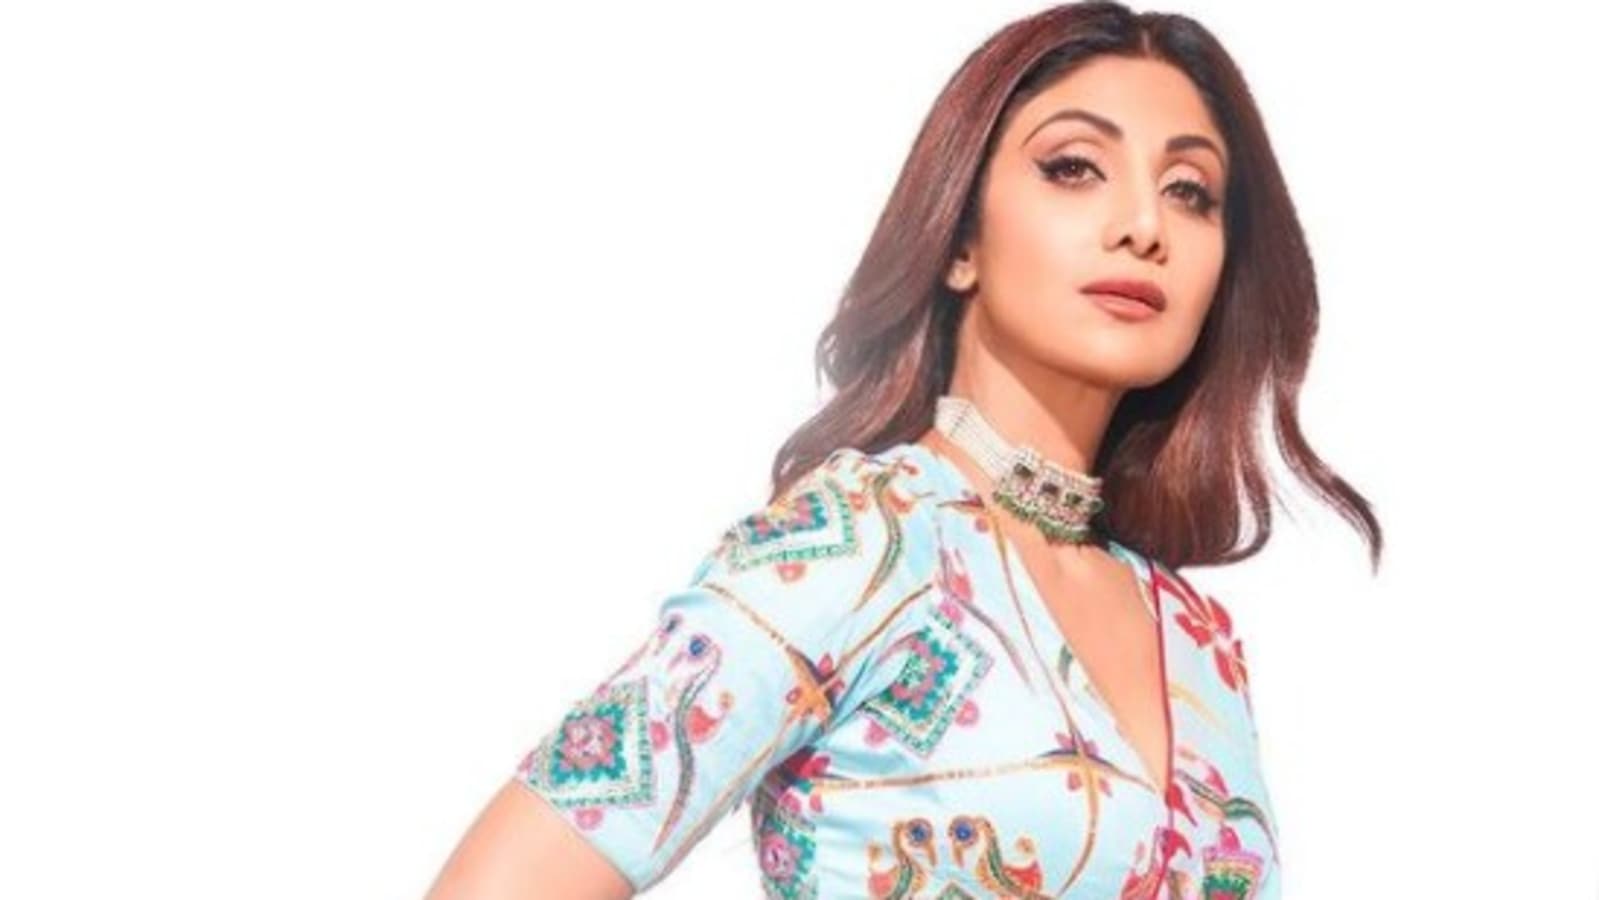 Shilpa Shetty Ki Chut - Shilpa Shetty shares pics from first photoshoot after Raj Kundra's arrest,  is 'determined to rise'. See here | Bollywood - Hindustan Times